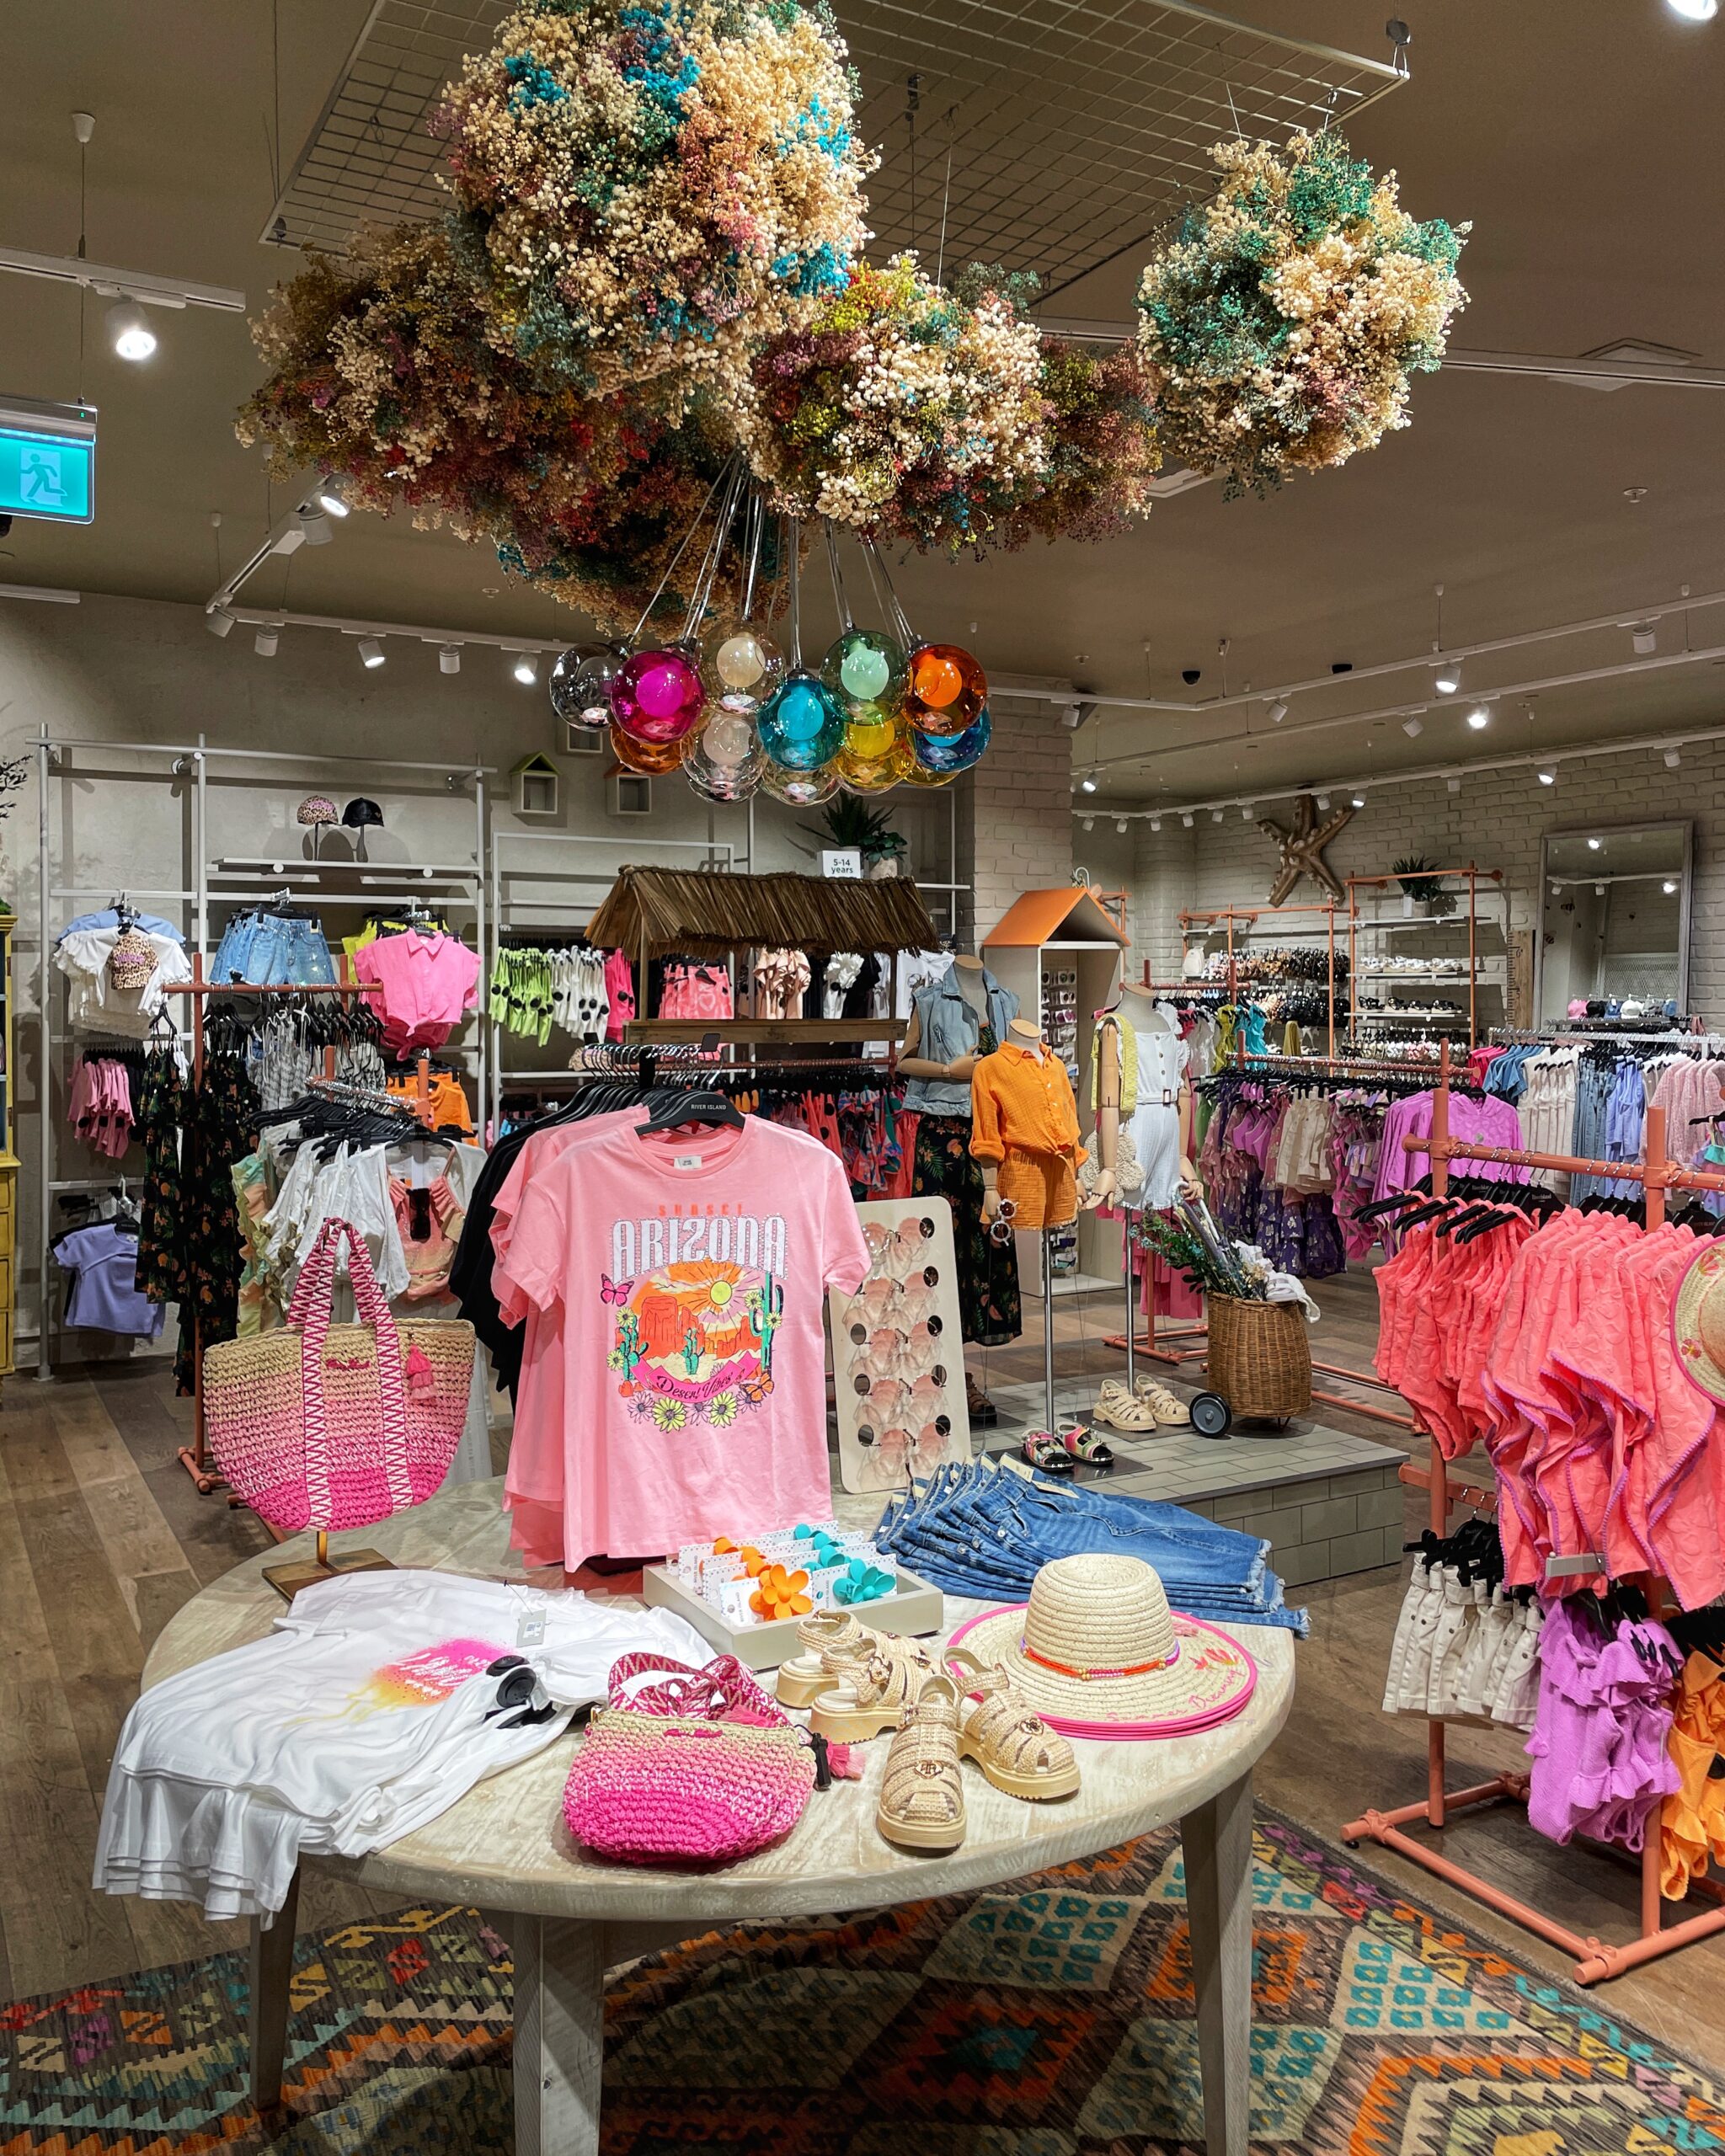 The kids' clothing collection in River Island